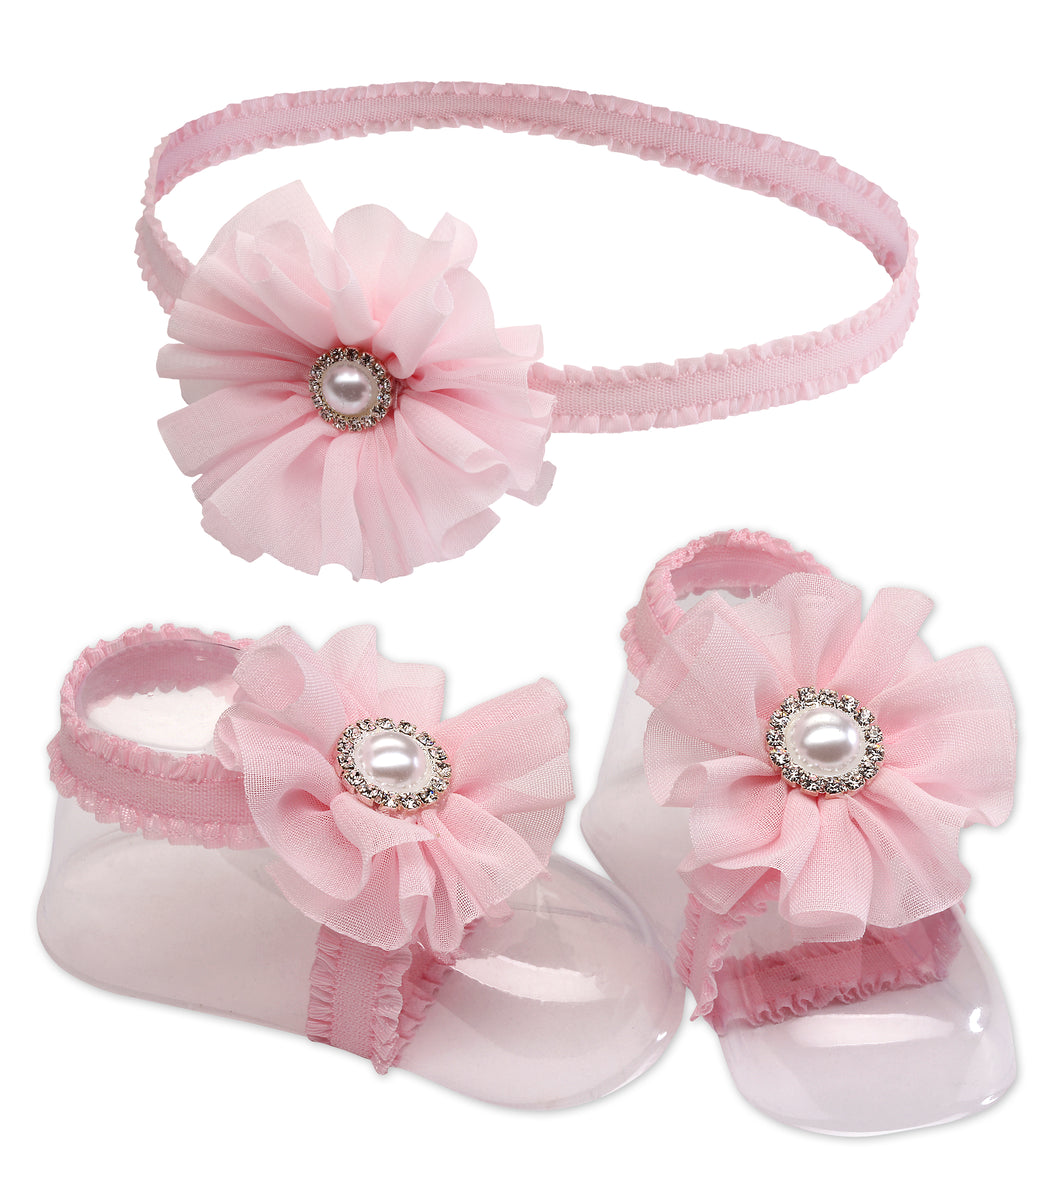 Baby Barefoot Sandal and Headband New Baby Girl Shower Gift – Cherished Moments Jewelry